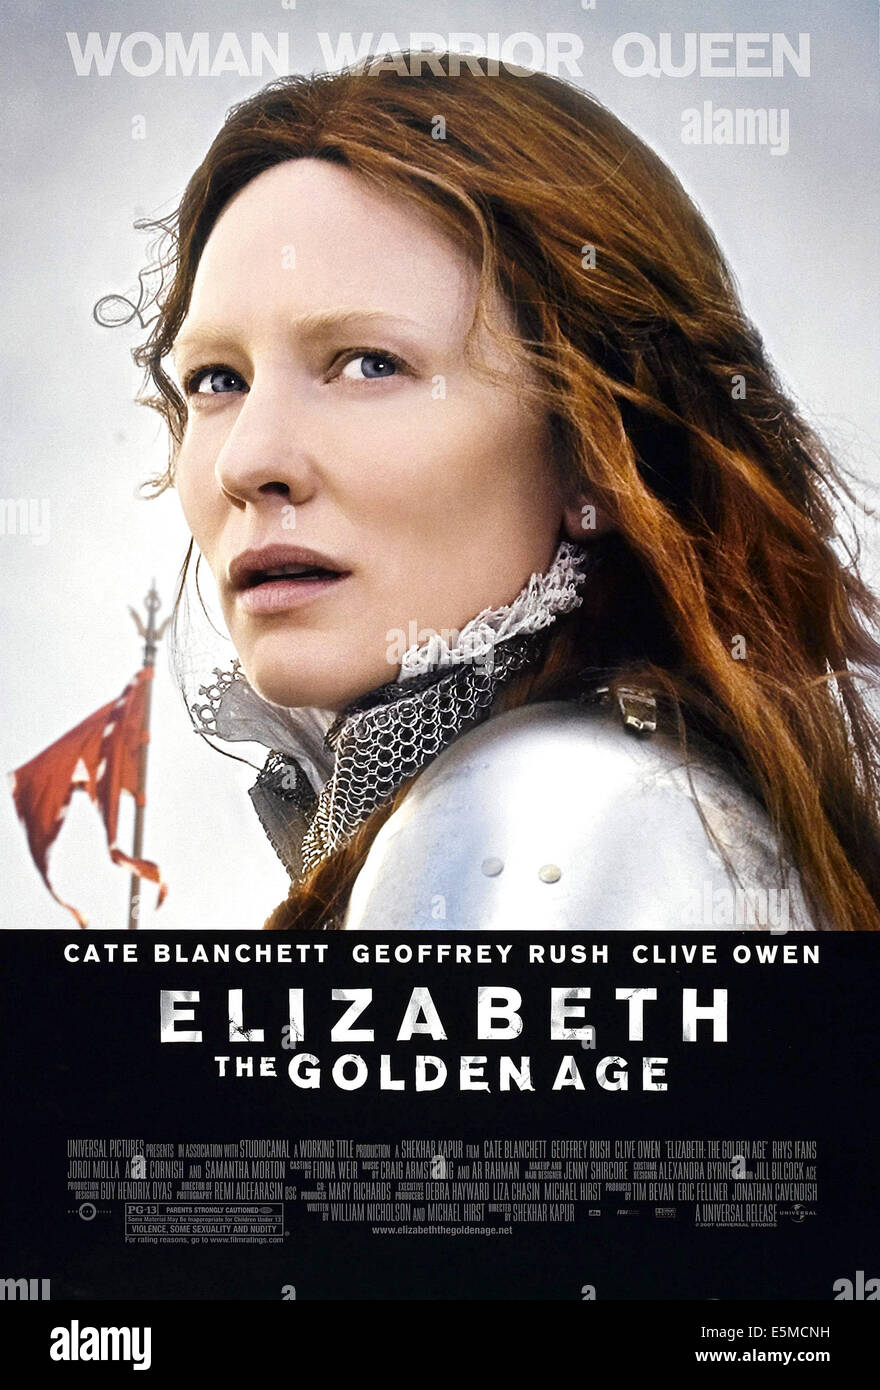 ELIZABETH THE GOLDEN AGE, Cate Blanchett, 2007. ©Universal Pictures/courtesy Everett Collection Stock Photo